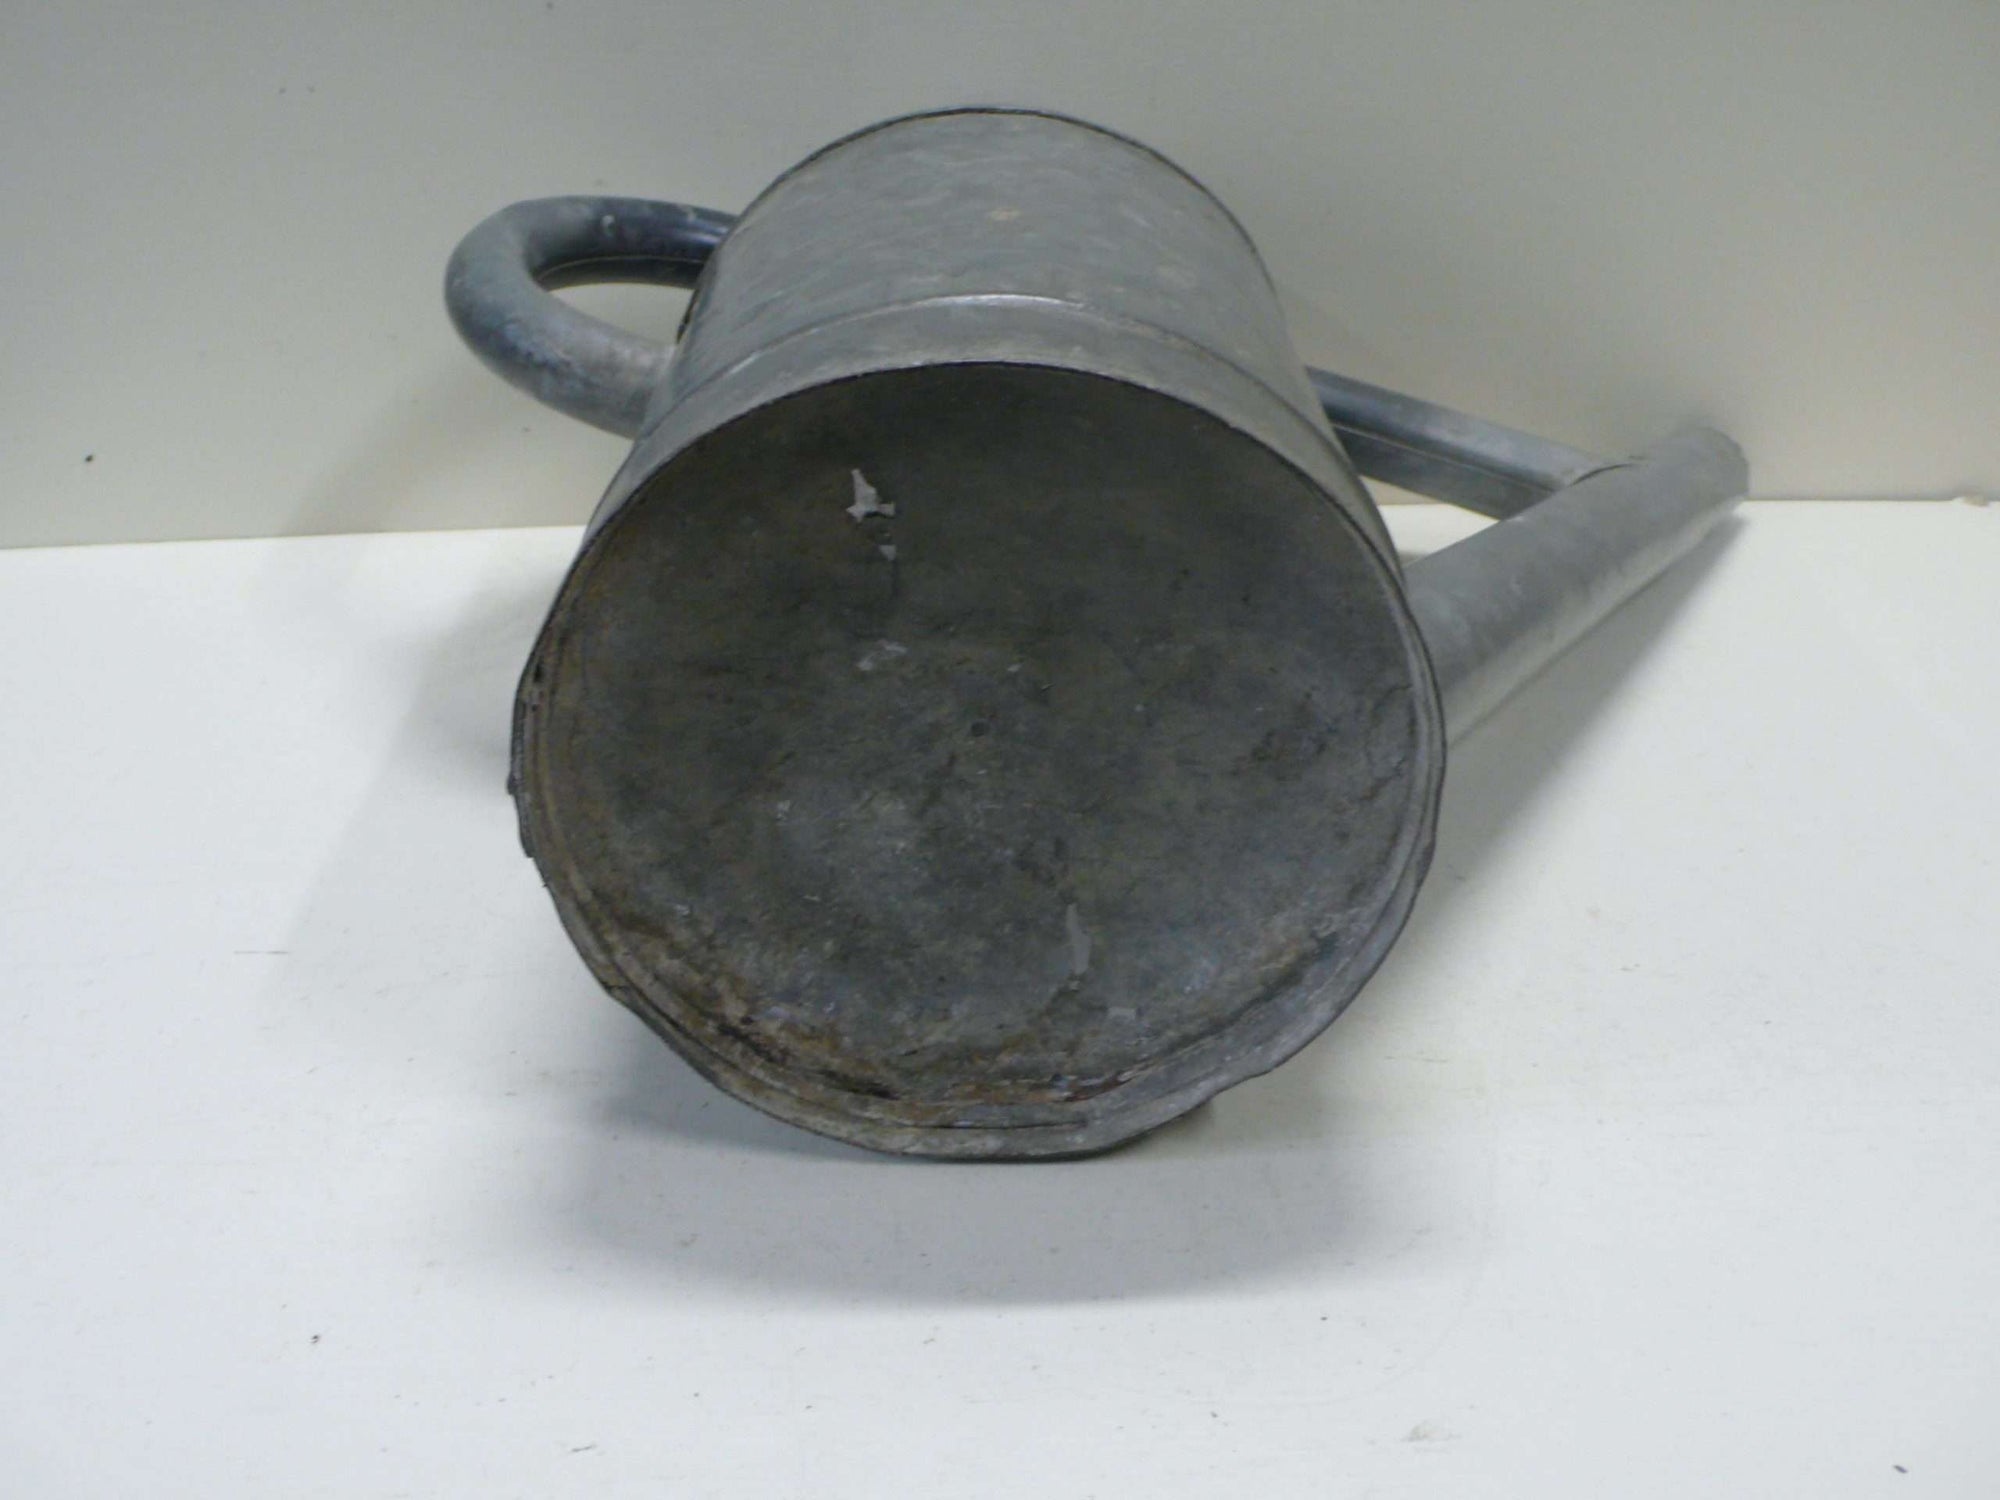 Vintage French Watering Can